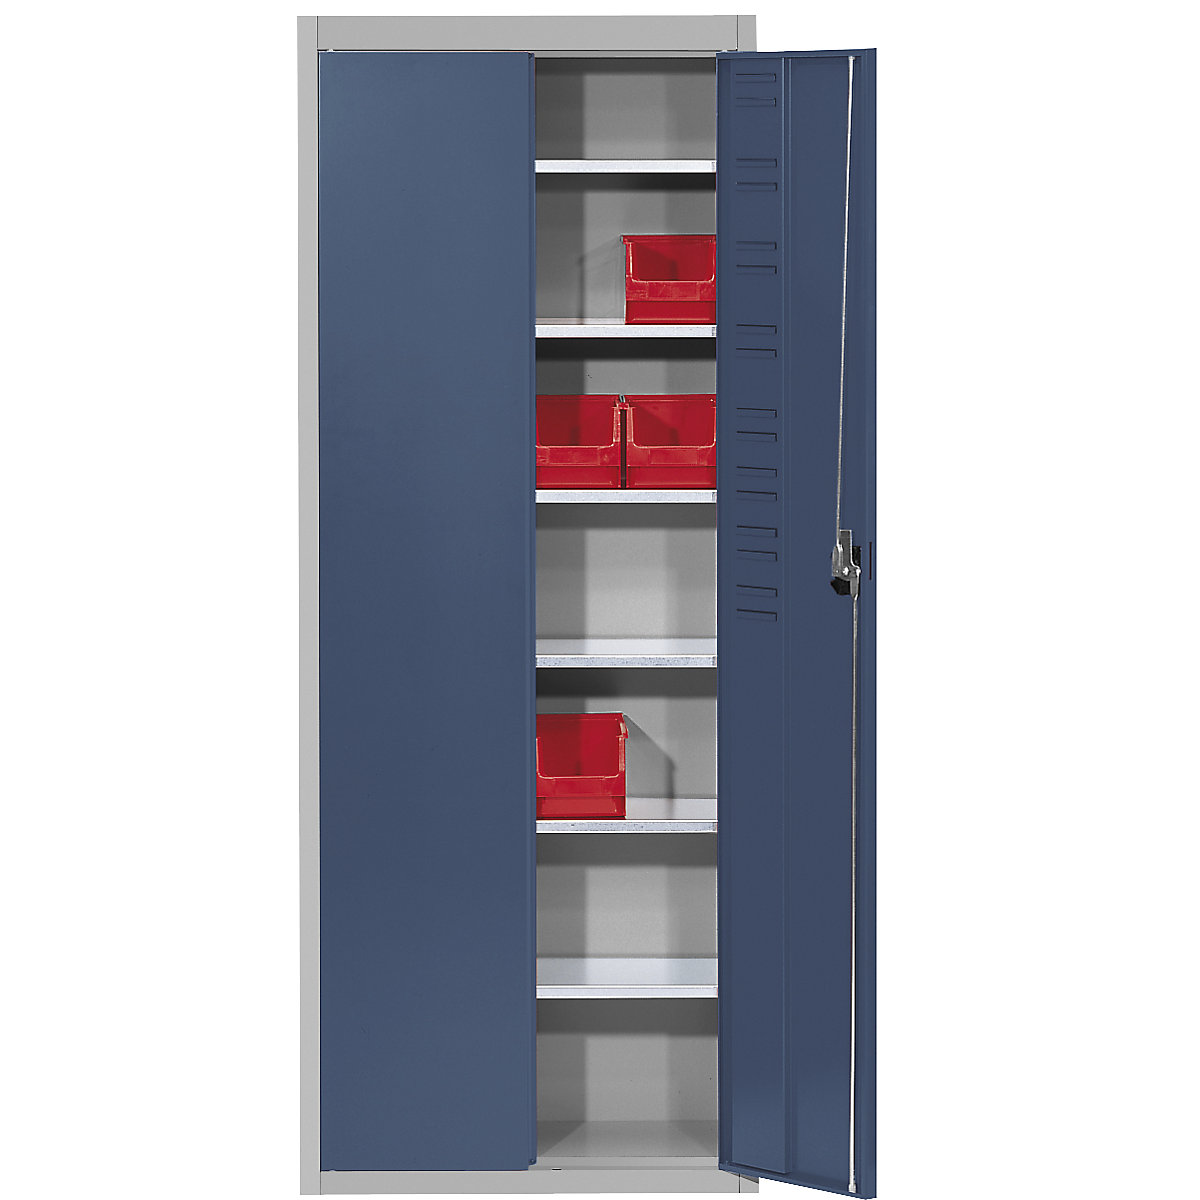 Storage cupboard, without open fronted storage bins – mauser, HxWxD 1740 x 680 x 280 mm, two-colour, grey body, blue doors, 3+ items-4